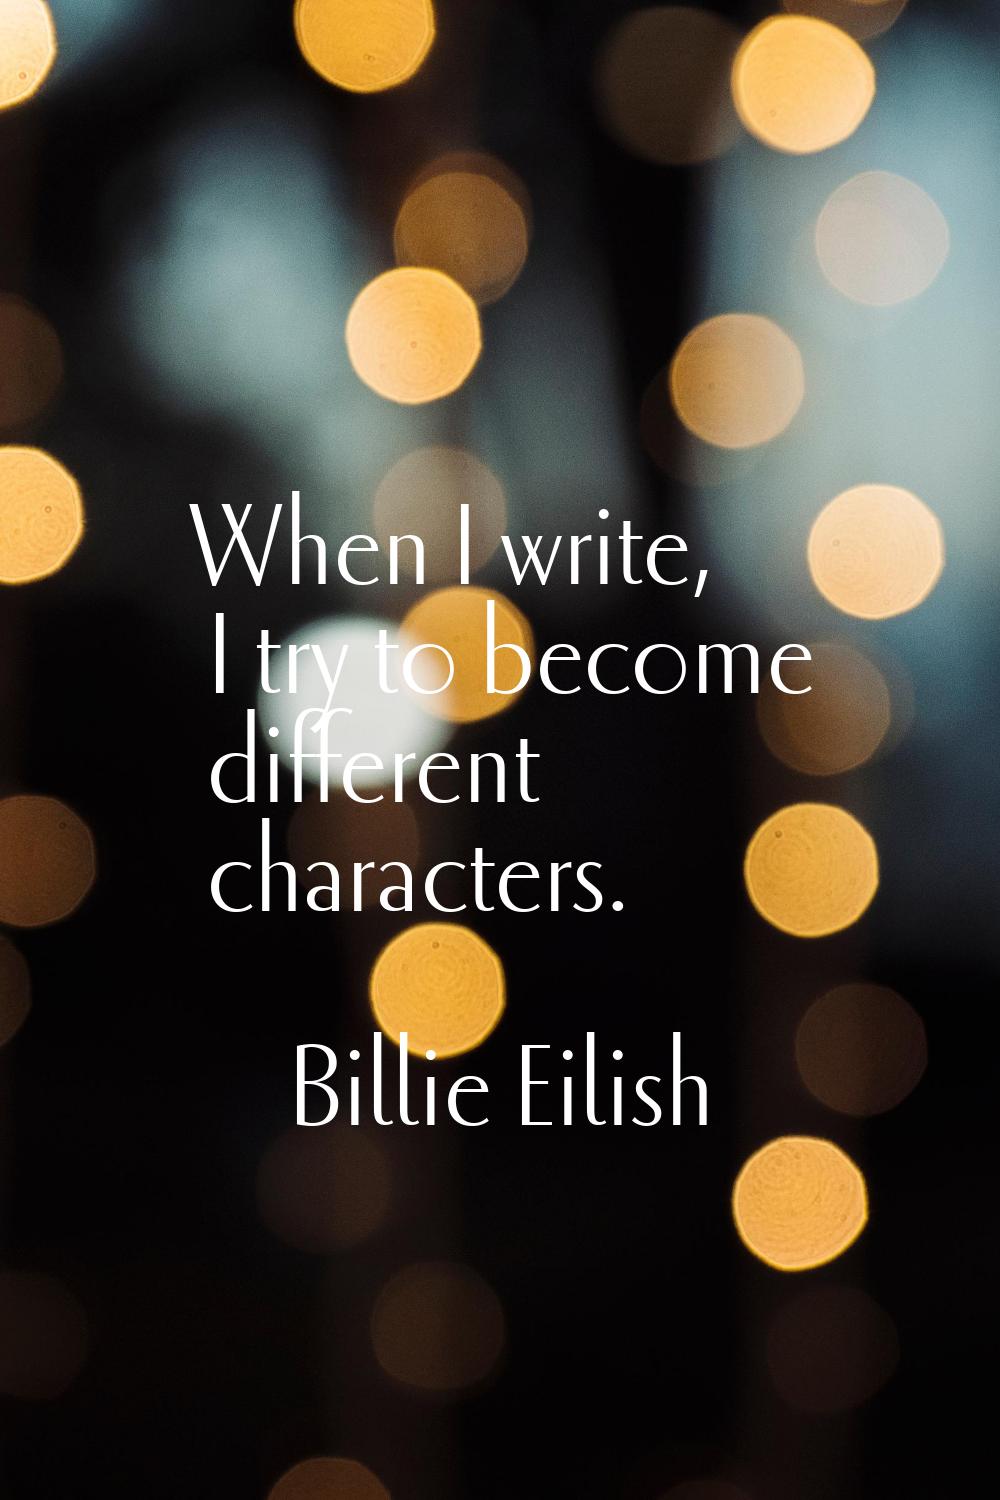 When I write, I try to become different characters.